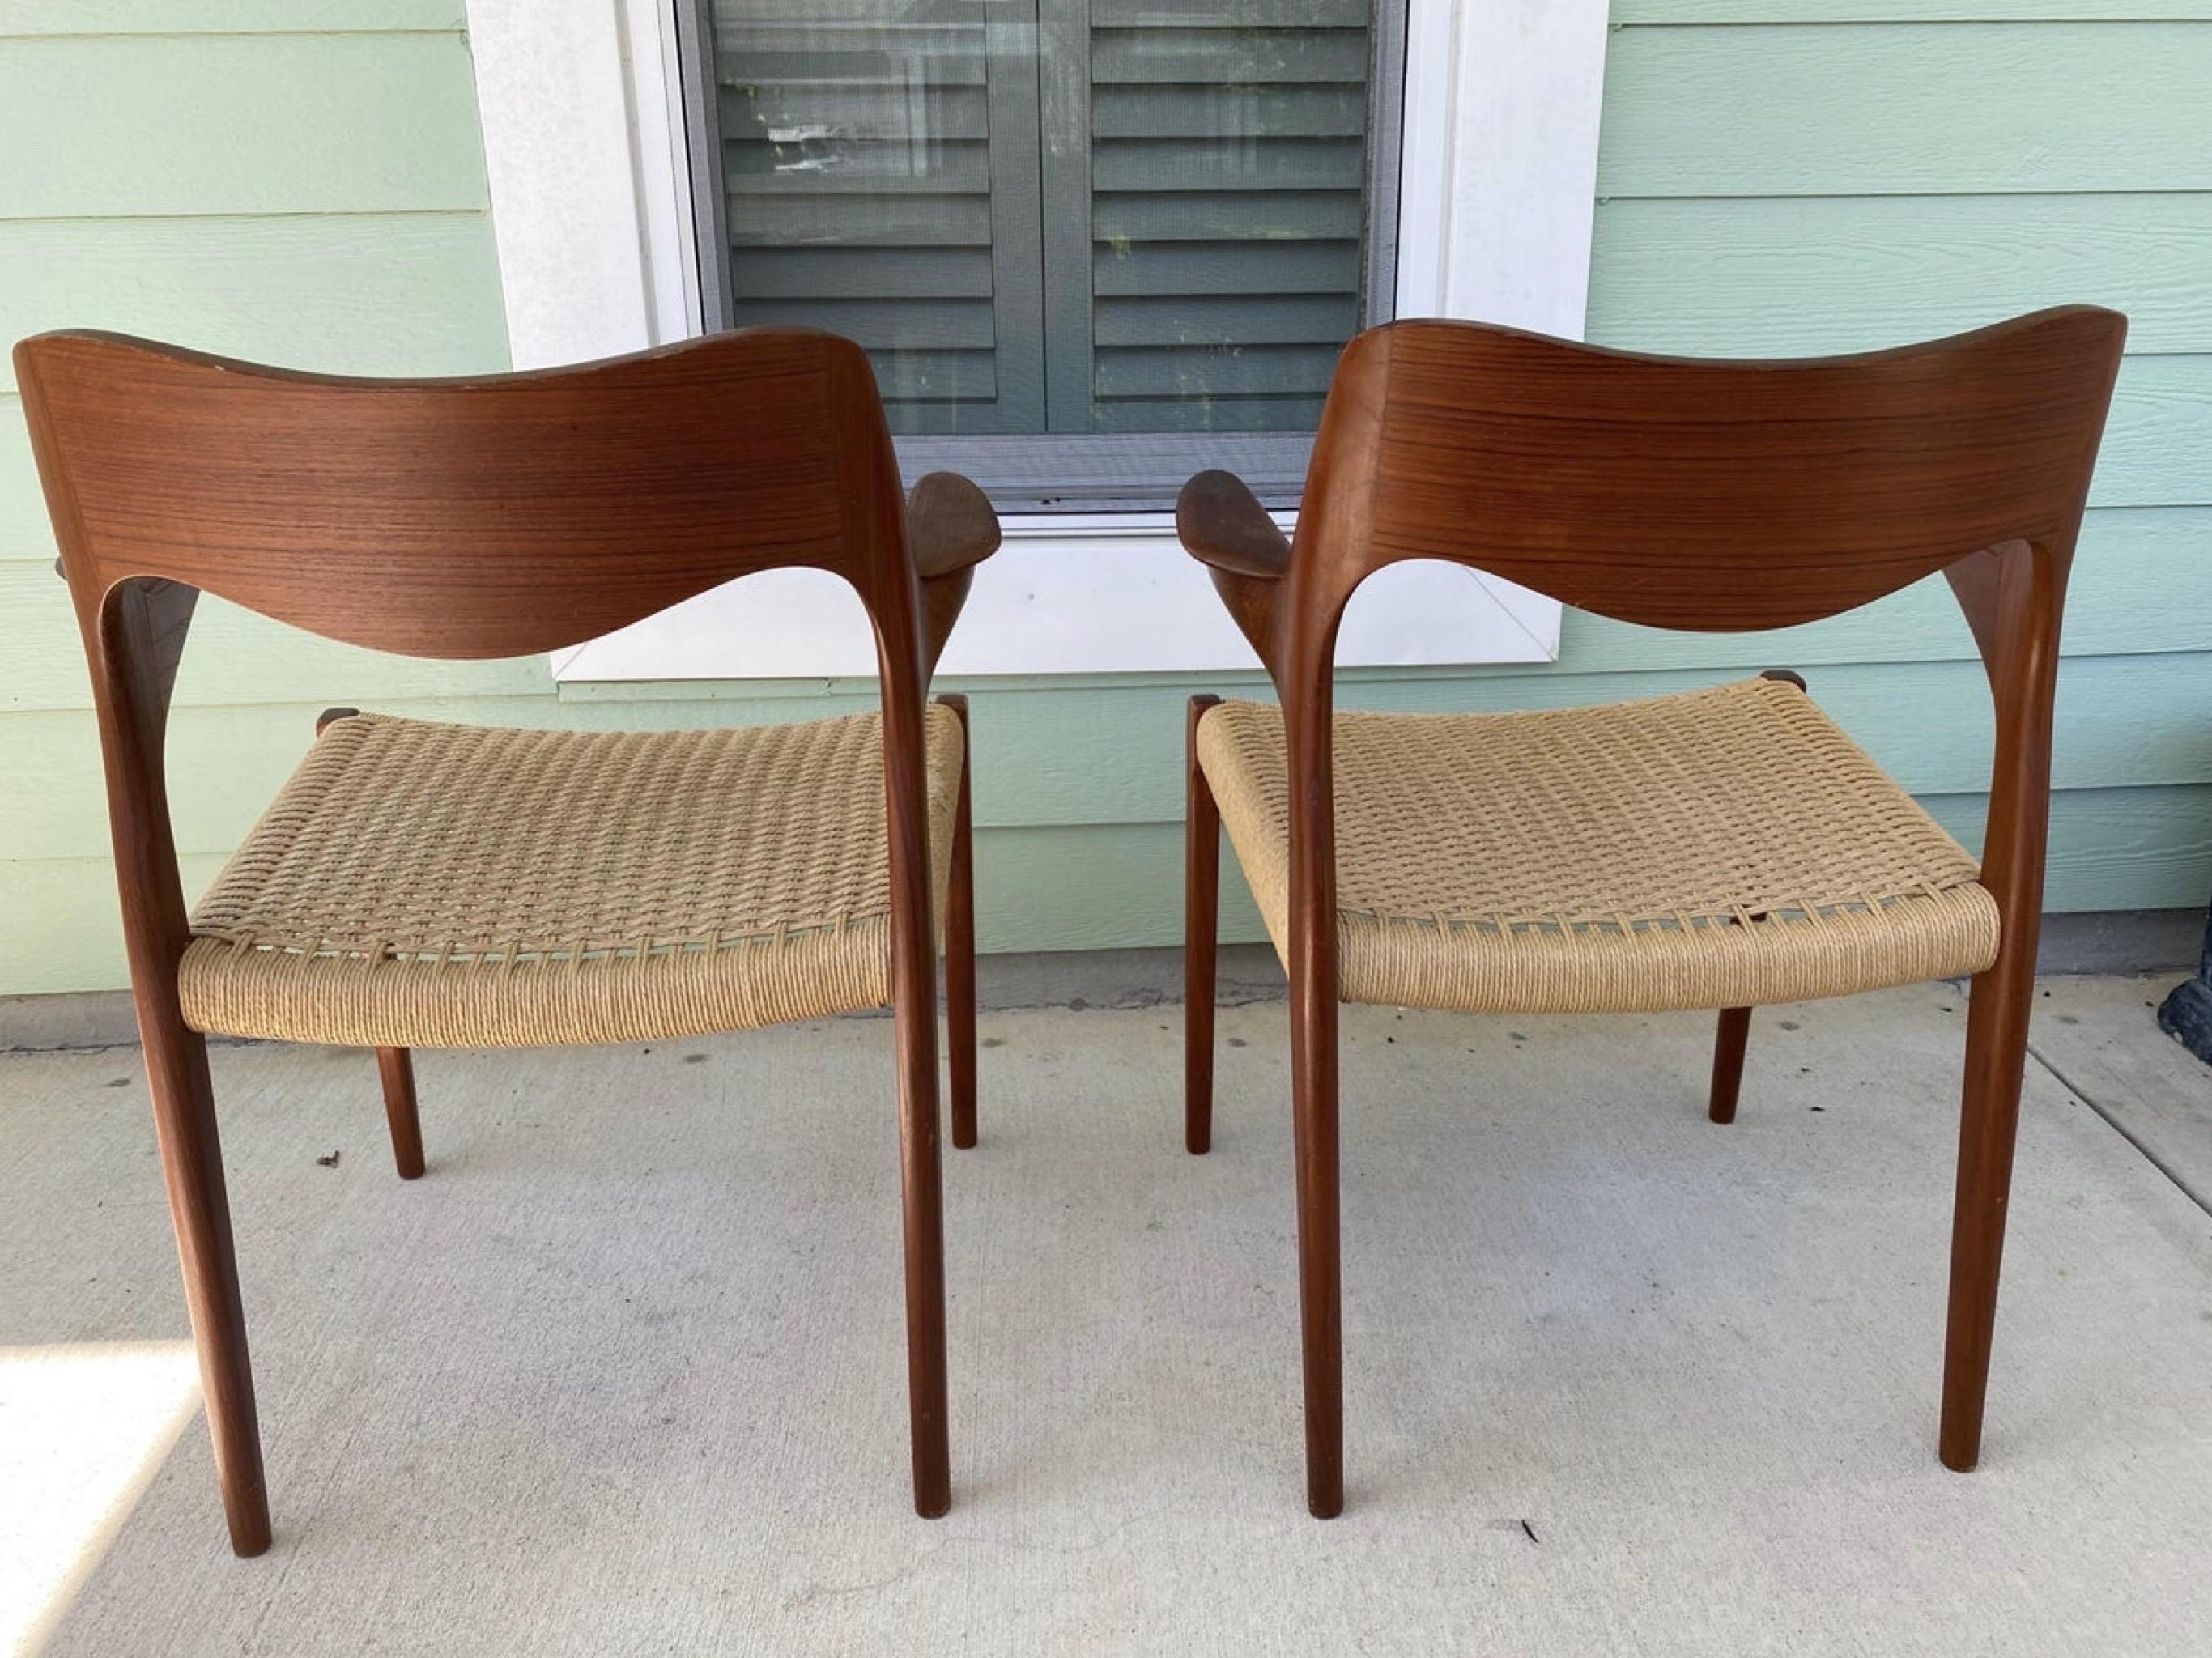 For your consideration we have the iconic set of 2 Niels Møller Captain's Chairs in teak with the Danish Cord Seats. Distinguishing features include beautifully sculpted teak wood and attractive Danish Cord seats. The teak is in great condition and